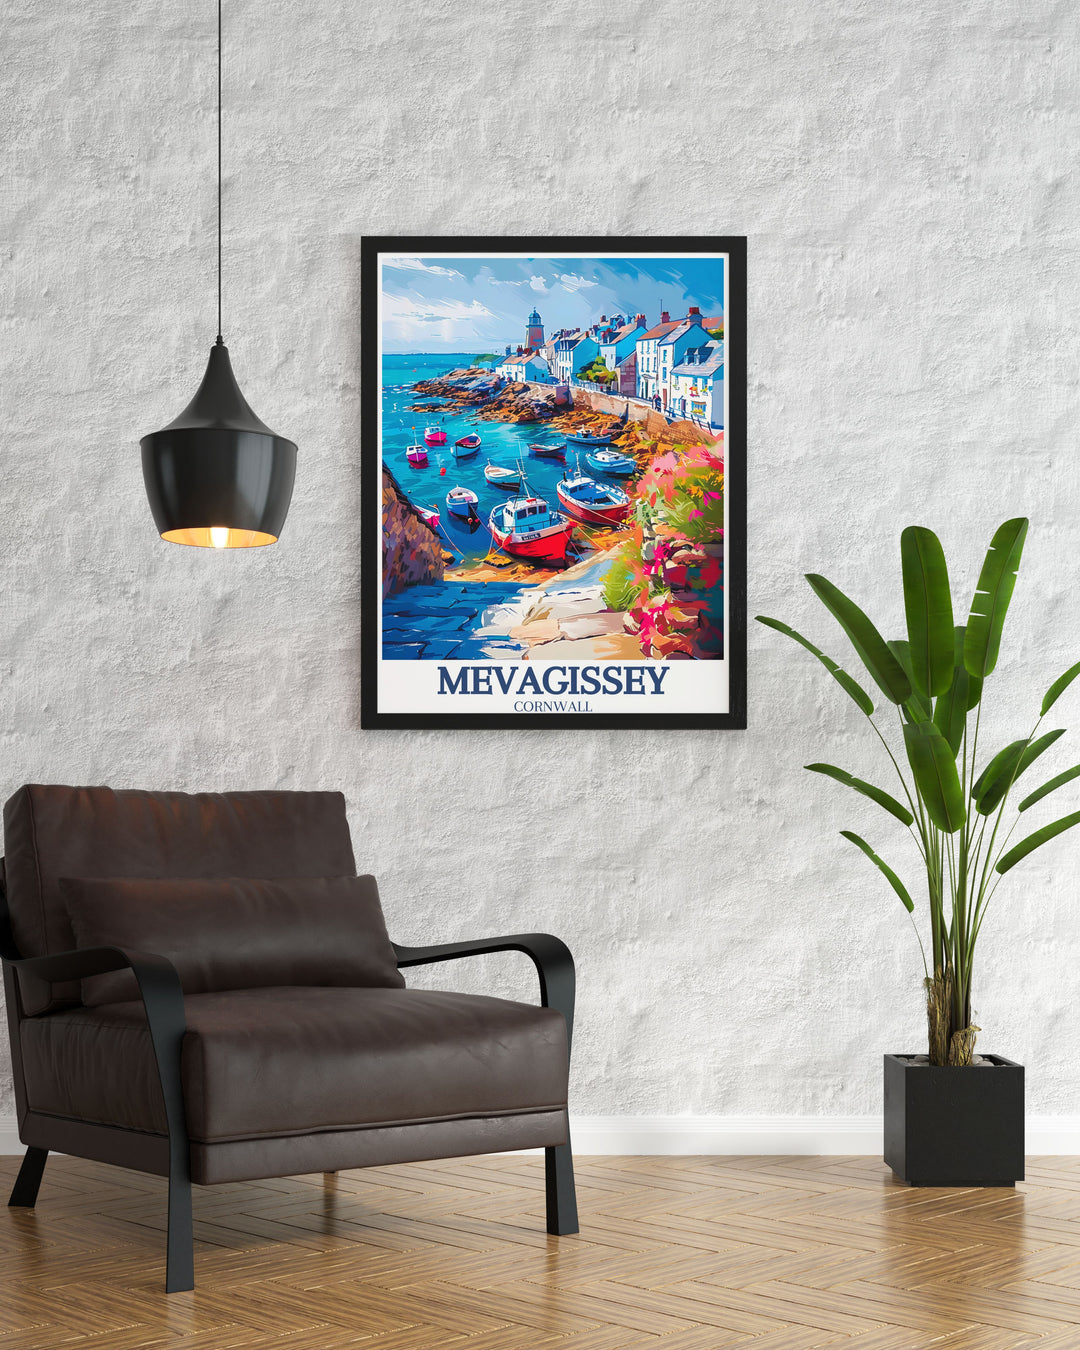 Celebrating the diverse attractions of Mevagissey, this poster captures the scenic harbor, iconic Clock Tower, and historical St. Peters Church. Perfect for those who love picturesque coastal villages and cultural heritage, this artwork brings the charm of Mevagissey into your home.